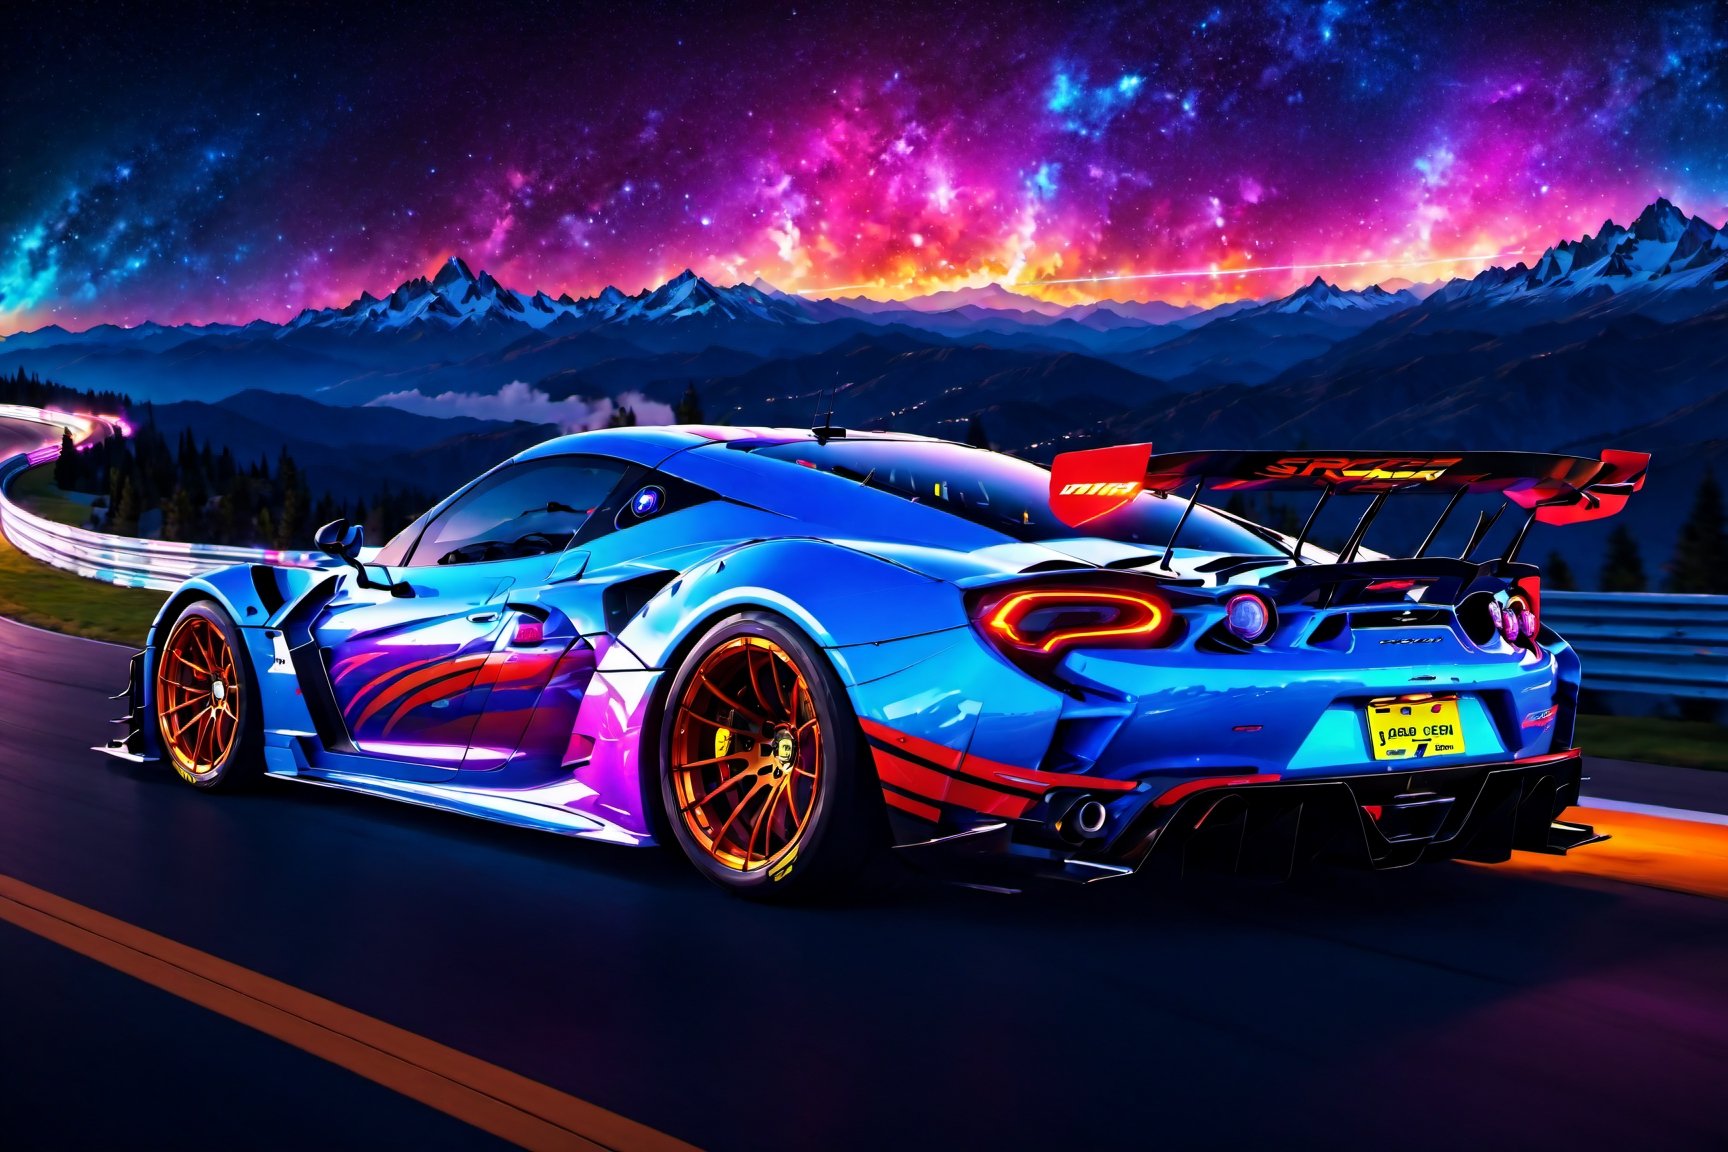 angelic sports car, blue and white colors, bright sky, colorful beautiful mountain, sharp, clouds, detailed car body ,ethereal art, detailed tires, fire scene, more detail, (masterpiece, best quality, ultra-detailed, 8K), race car, street racing-inspired,Drifting inspired, LED, ((Twin headlights)), (((Bright neon color racing stripes))), (Black racing wheels), Wheelspin showing motion, Show car in motion, Burnout,  wide body kit, modified car,  racing livery, masterpiece, best quality, realistic, ultra highres, (((depth of field))), (full dual colour neon lights:1.2), (hard dual color lighting:1.4), (detailed background), (masterpiece:1.2), (ultra detailed), (best quality), intricate, comprehensive cinematic, magical photography, (gradients), glossy, Night with galaxy sky, Fast action style, fire out of tail pipes, Sideways drifting in to a turn, Neon galaxy metalic paint with race stripes, GTR Nismo, NSX, Porsche, Lamborghini, Ferrari, Bugatti, Ariel Atom, BMW, Audi, Mazda, Toyota supra, Lamborghini Aventador,  aesthetic,intricate, realistic,cinematic lighting, Neon Paint, streaks of fire,c_car,more detail XL,mecha,Concept Cars,DonMPl4sm4T3chXL ,Sexy,vaporwave style,Comic Book-Style 2d,spcrft